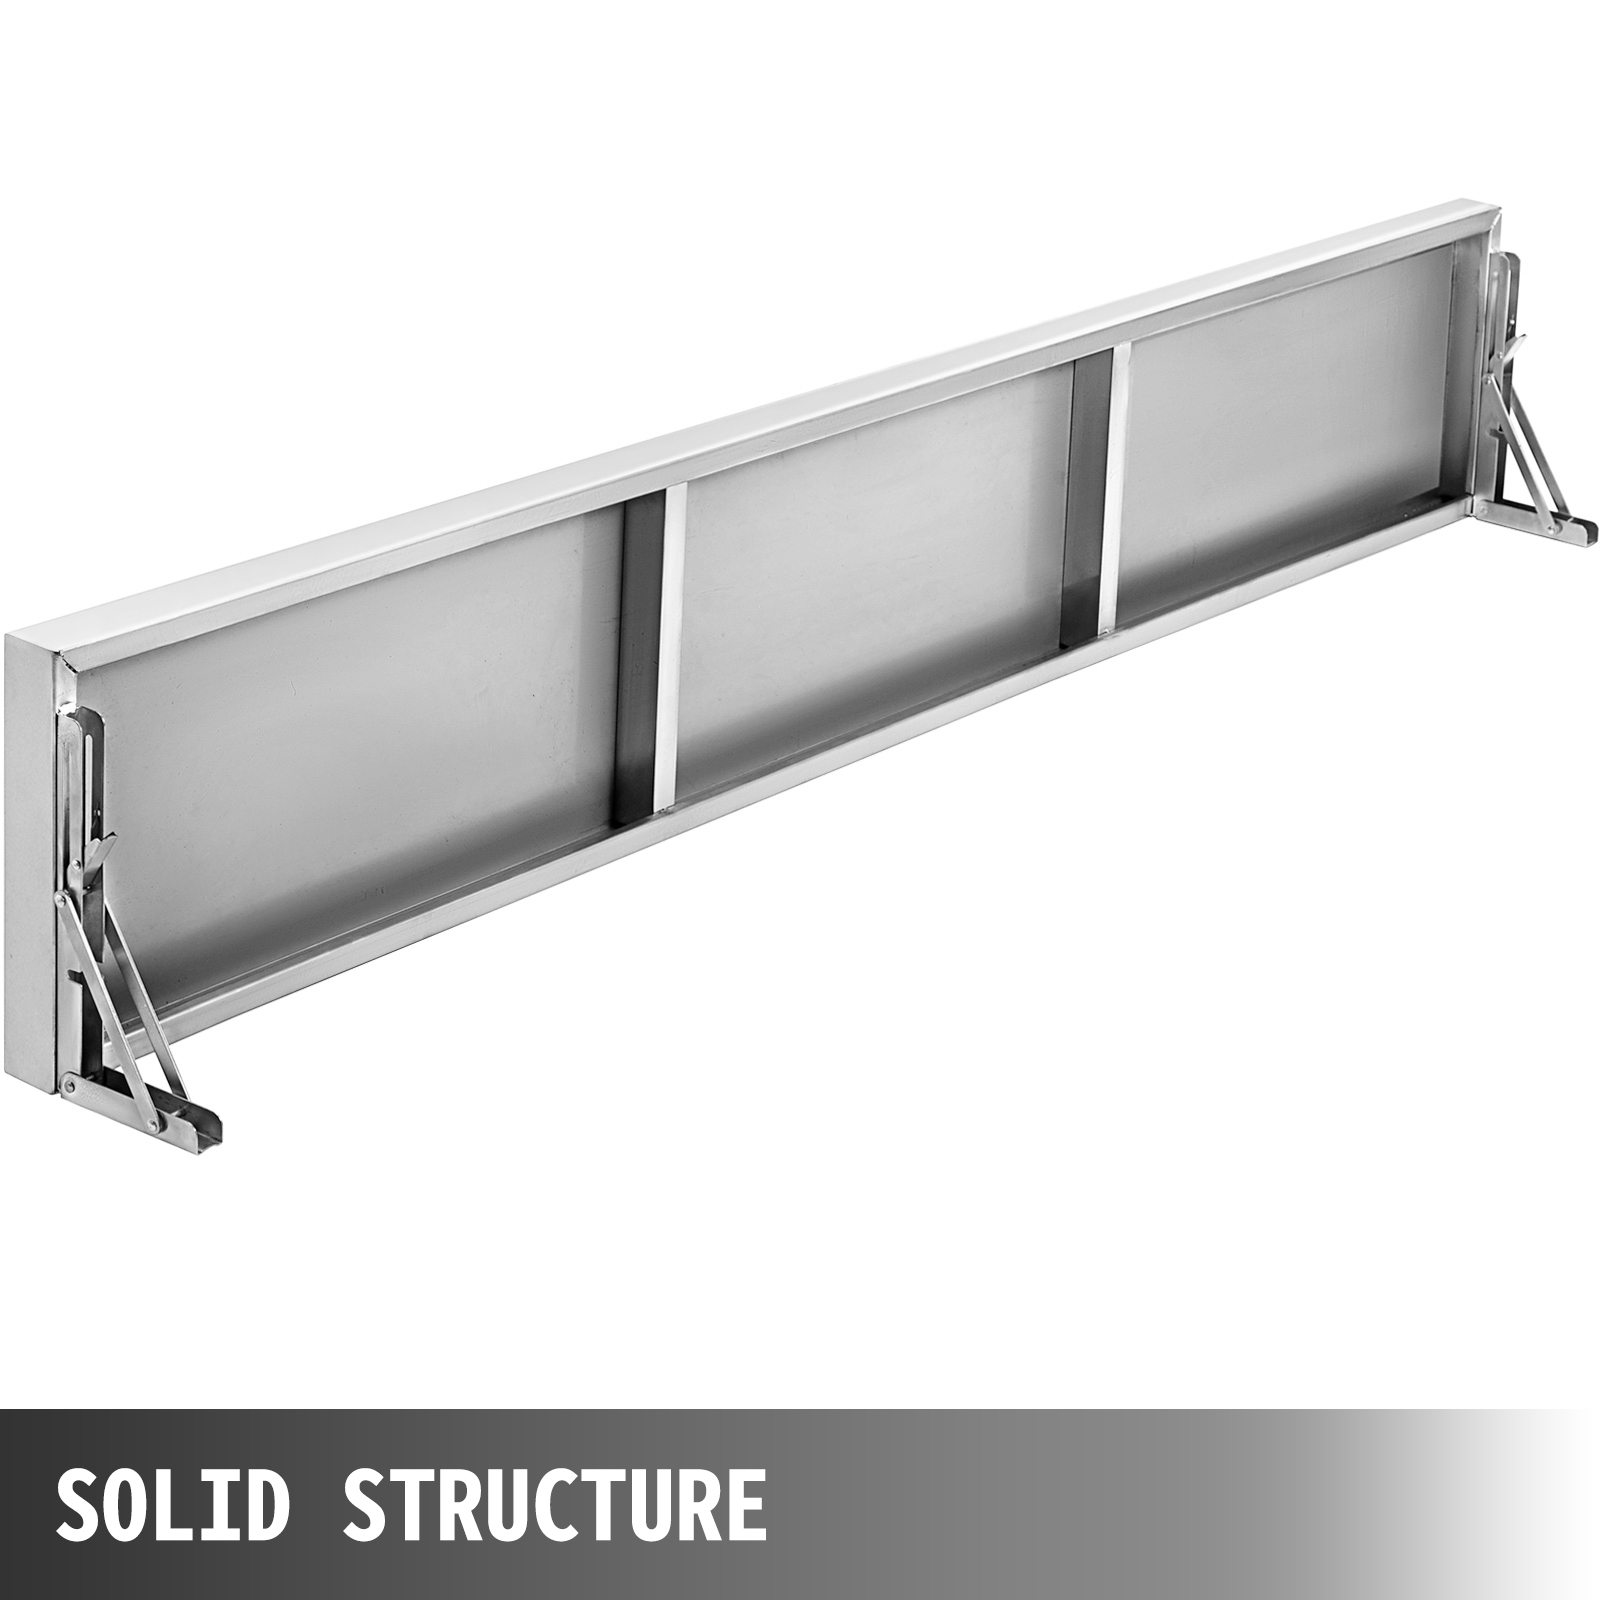 Concession Stand Shelf For Window 6 Ft, Food Truck Shelving